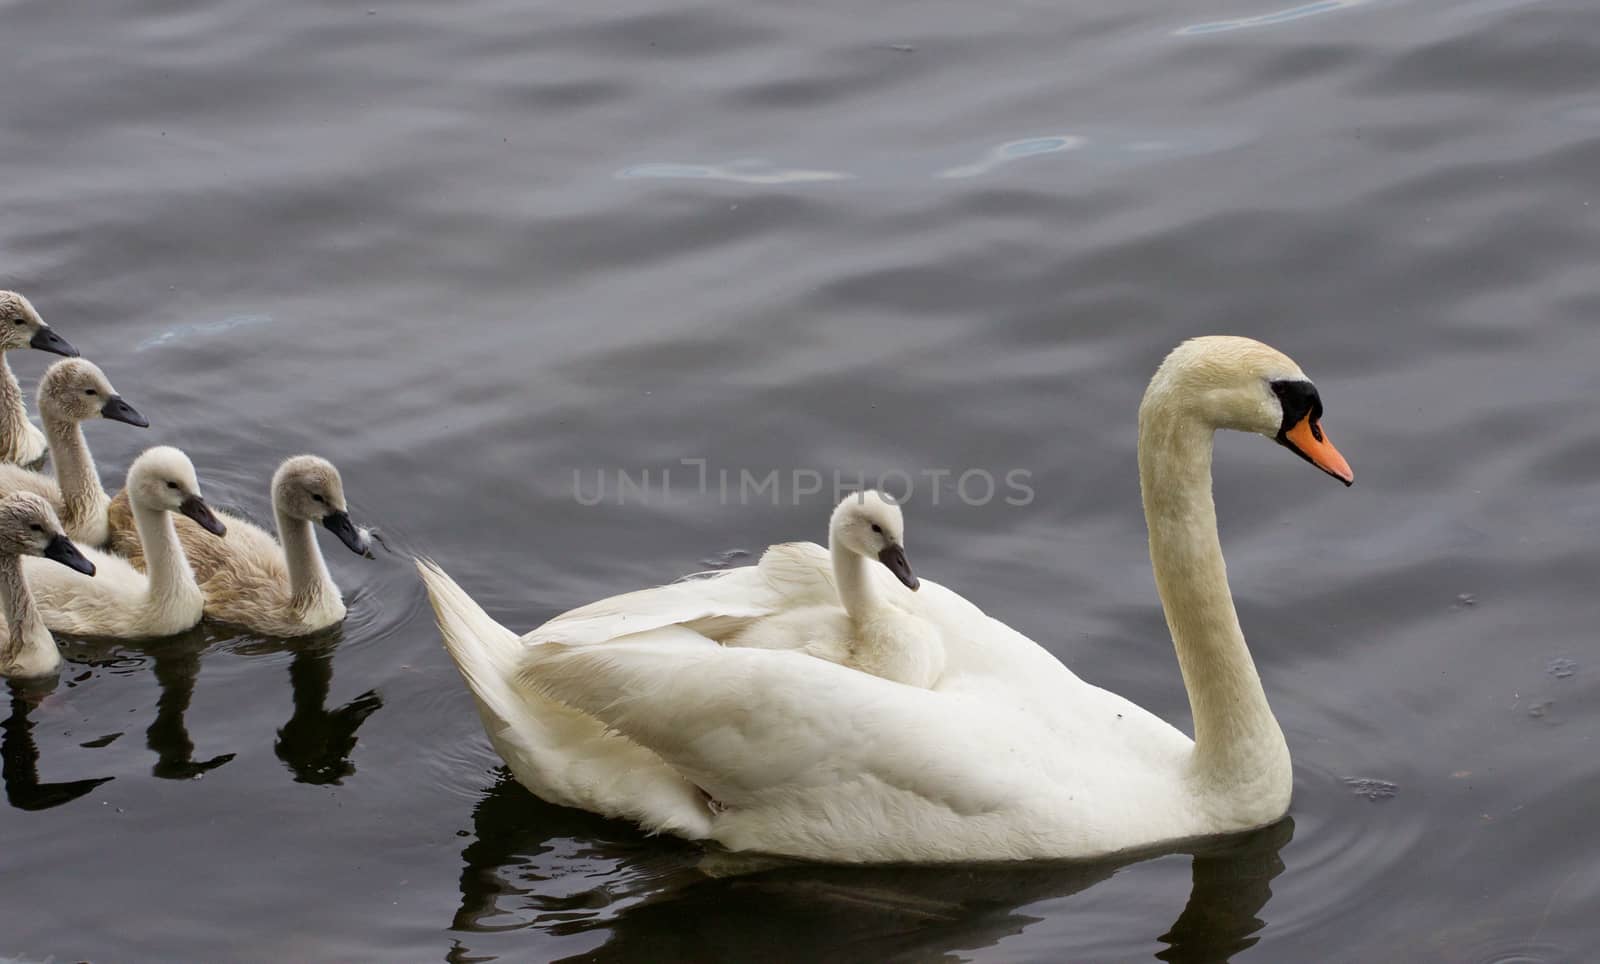 The chicks are following their mother-swan by teo